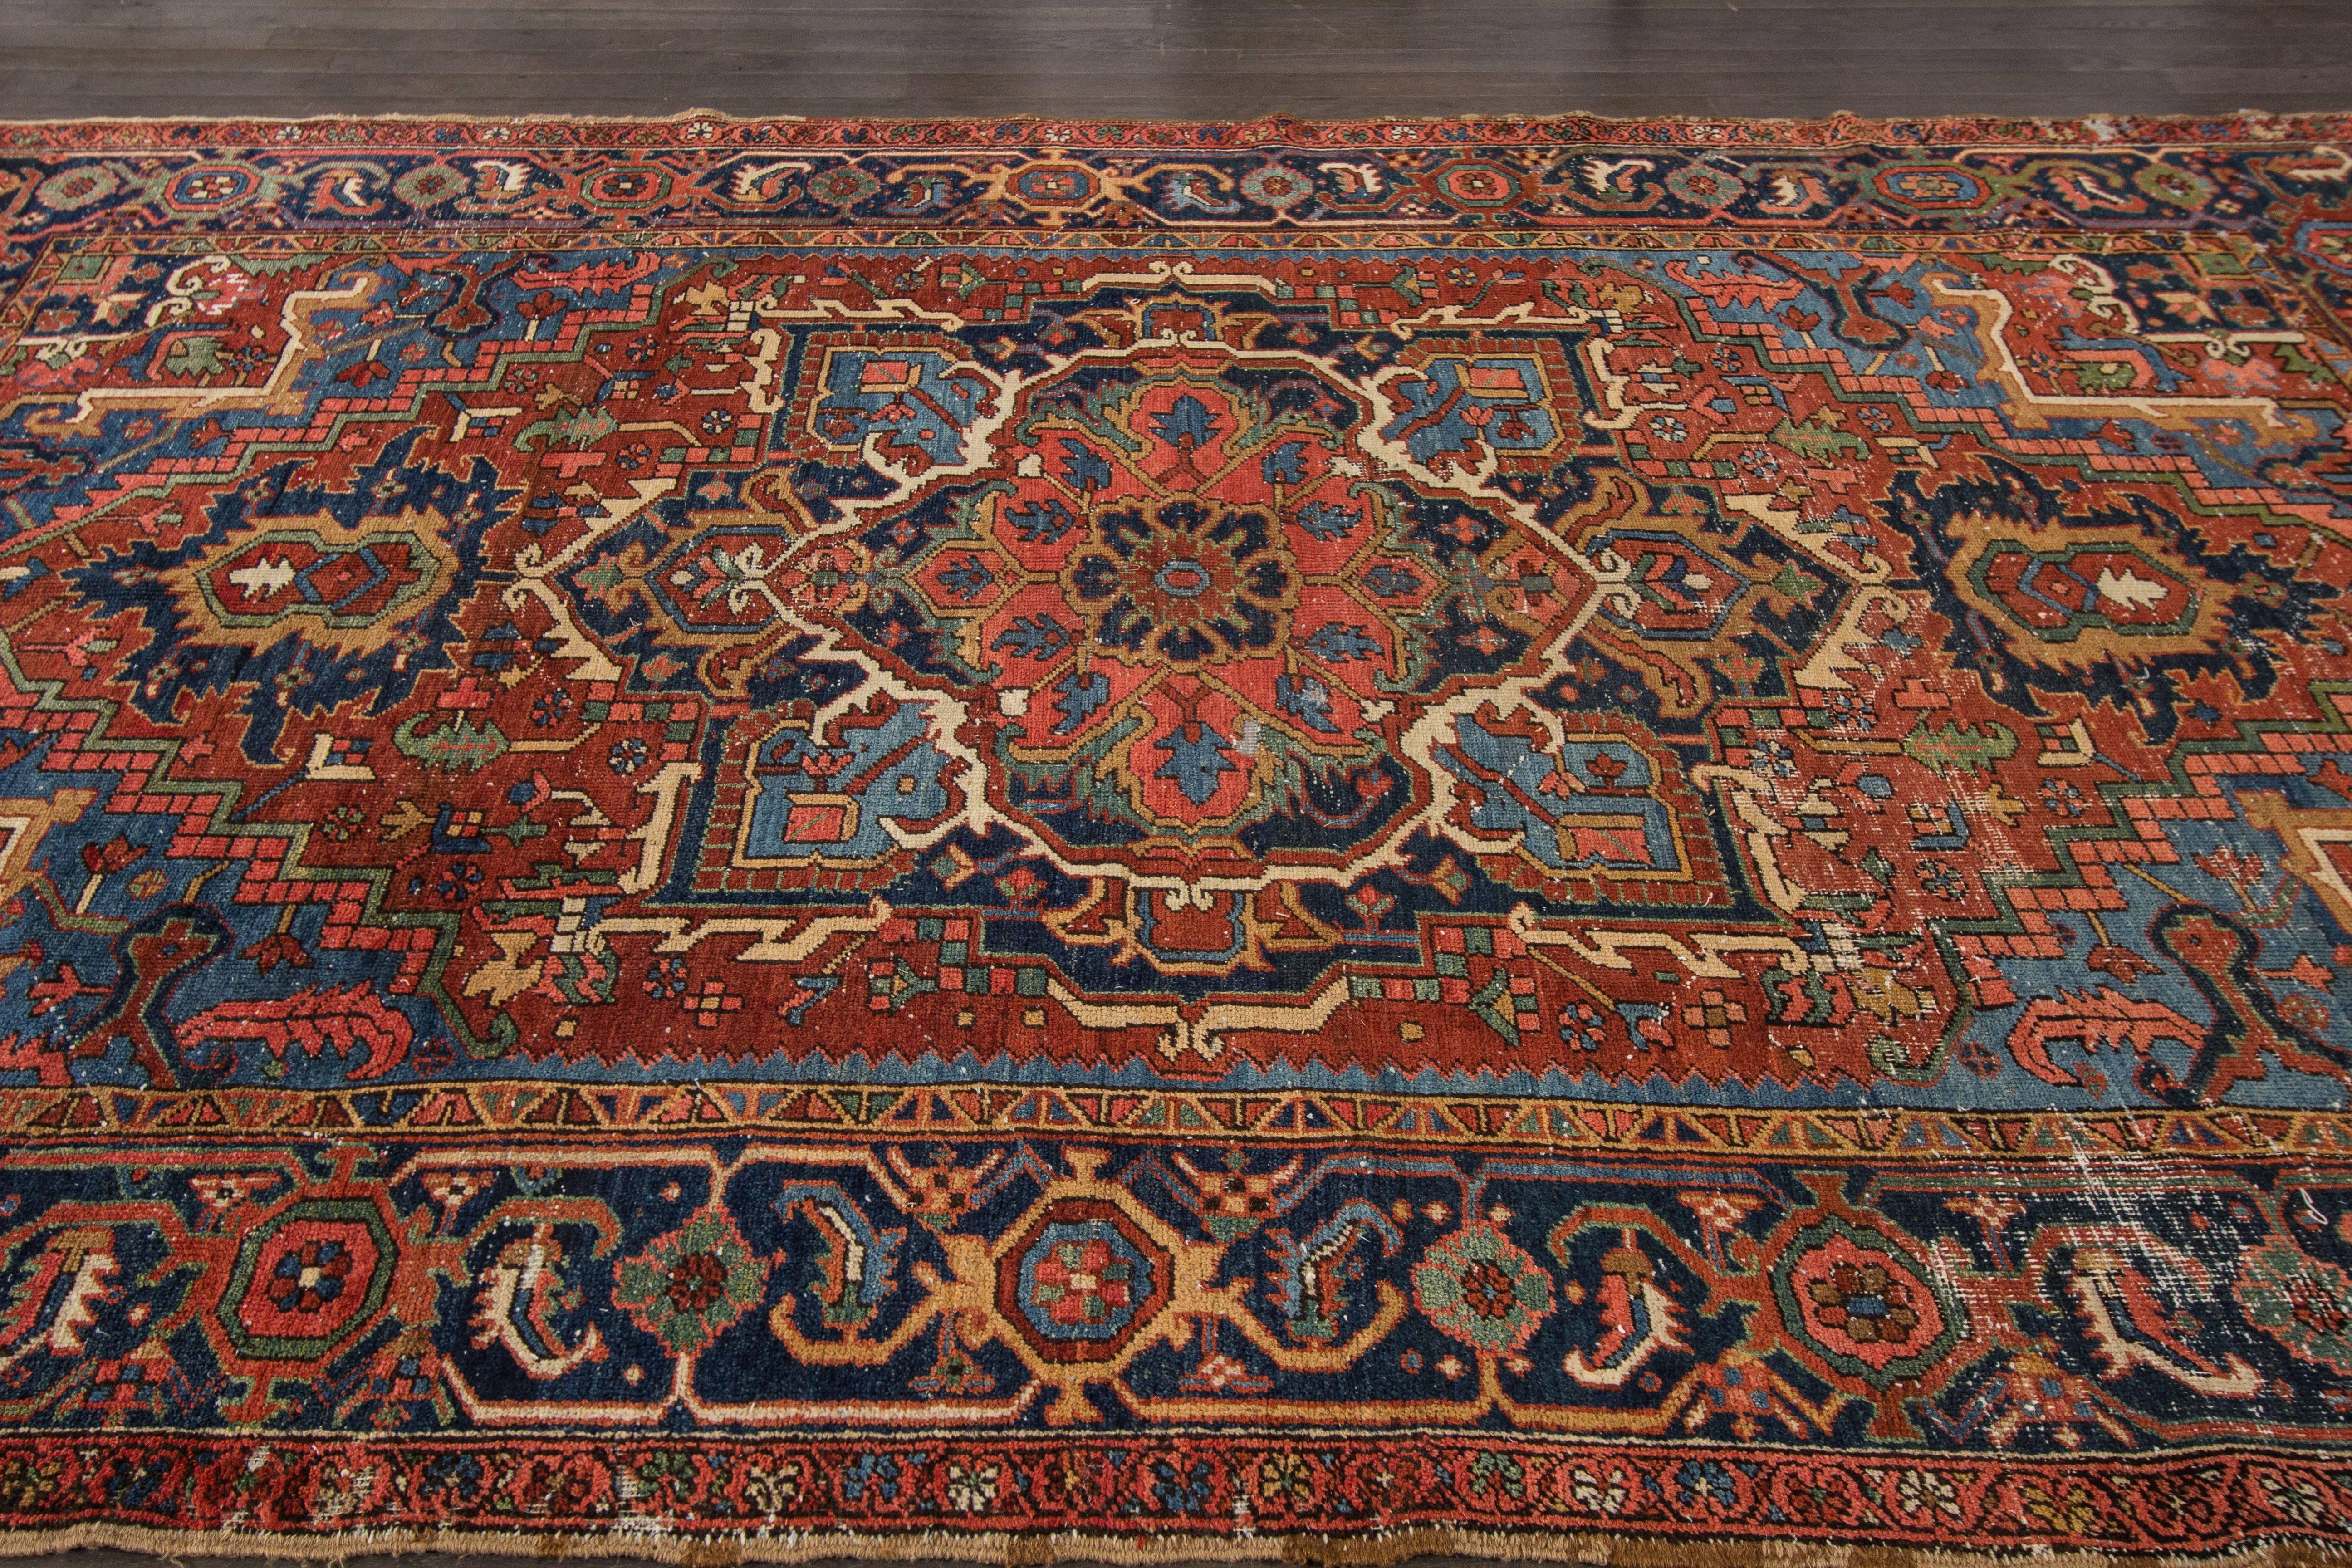 Measures: 7.3 x 9.8
A gorgeous one of a kind antique Heriz rug with a floral medallion design on a red field. Accents of blue, green, brown and ivory throughout the piece.